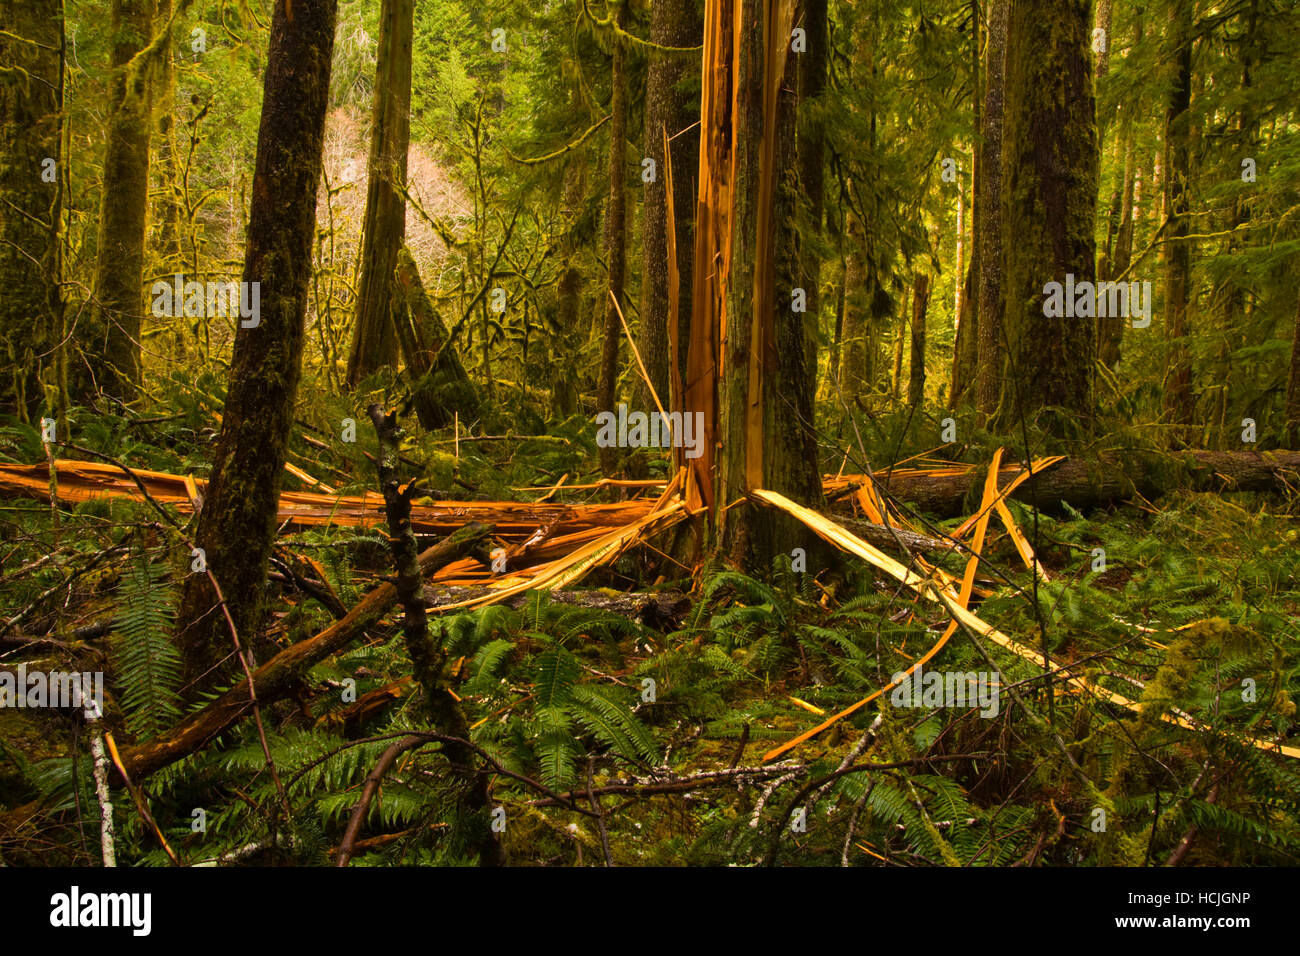 A western red cedar (Thuja plicata) tree lies violently splintered apart (possibly by a lightning strike) in the old-growth forest along Marymere Falls Trail, Olympic National Park, Washington. Stock Photo